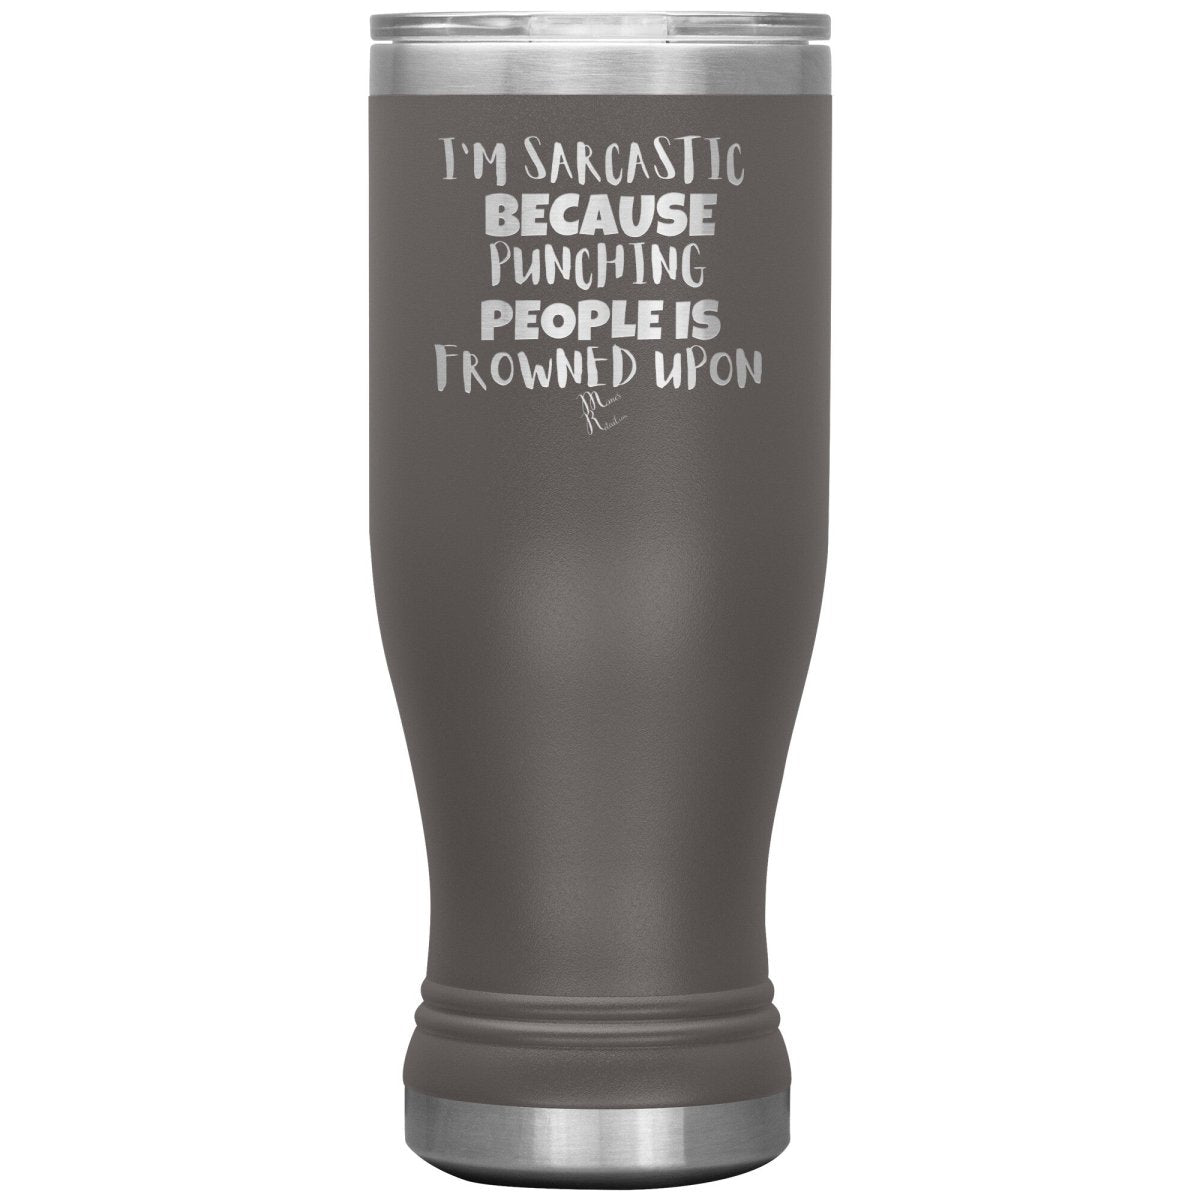 I'm Sarcastic Because Punching People is Frowned Upon Tumblers, 20oz BOHO Insulated Tumbler / Pewter - MemesRetail.com